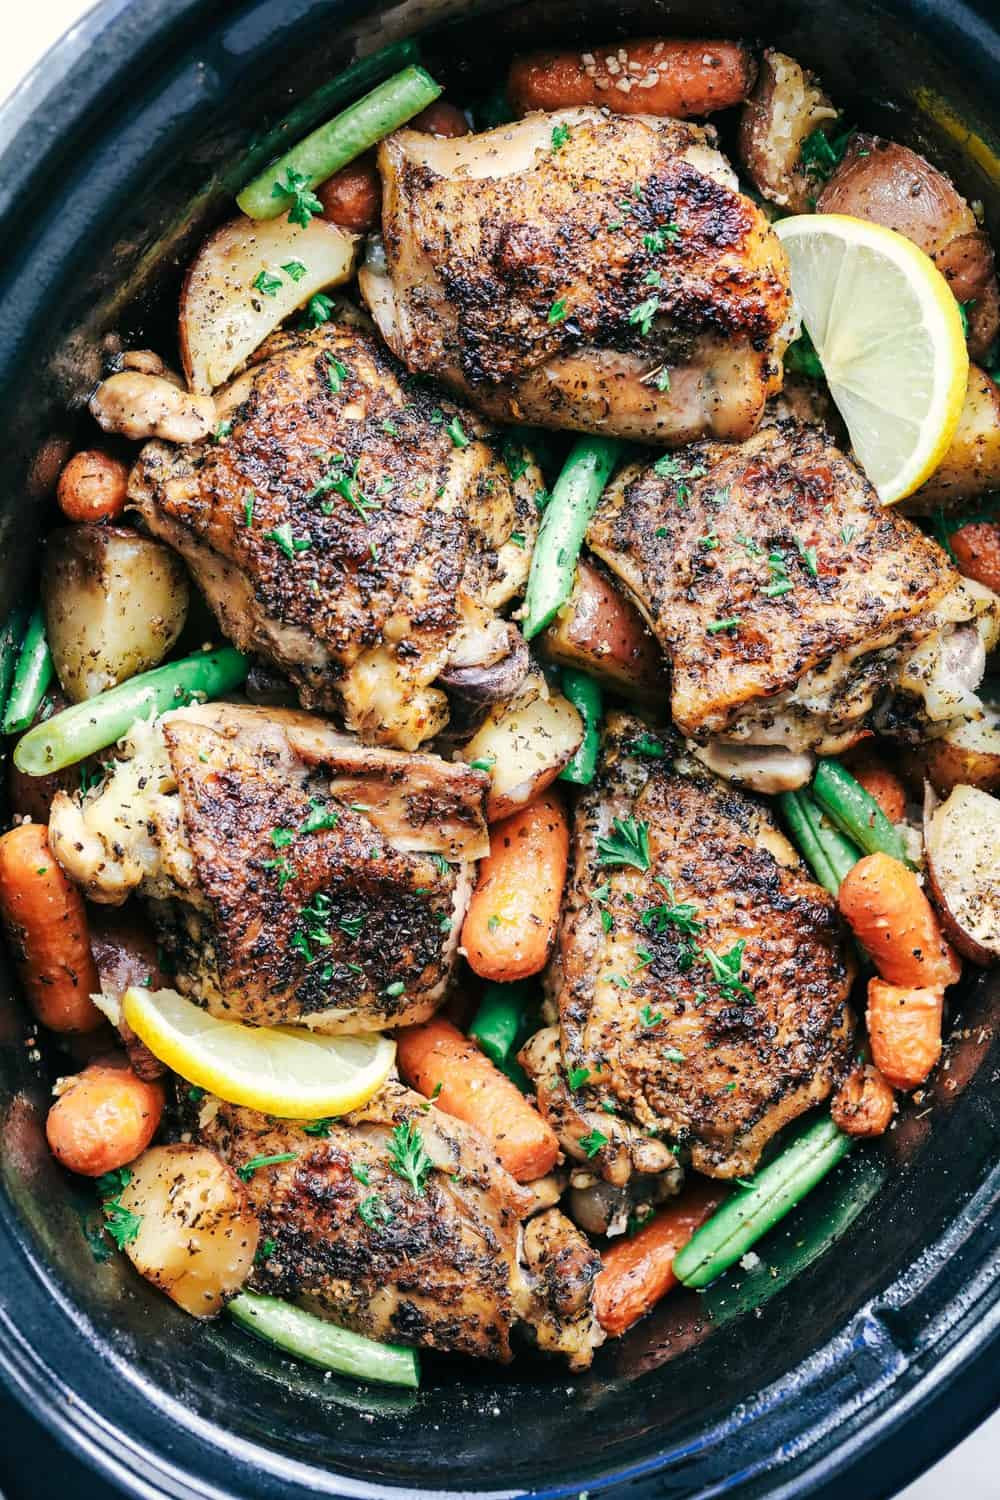 Chicken Thighs In Slow Cooker
 Slow Cooker Lemon Garlic Chicken Thighs and Veggies